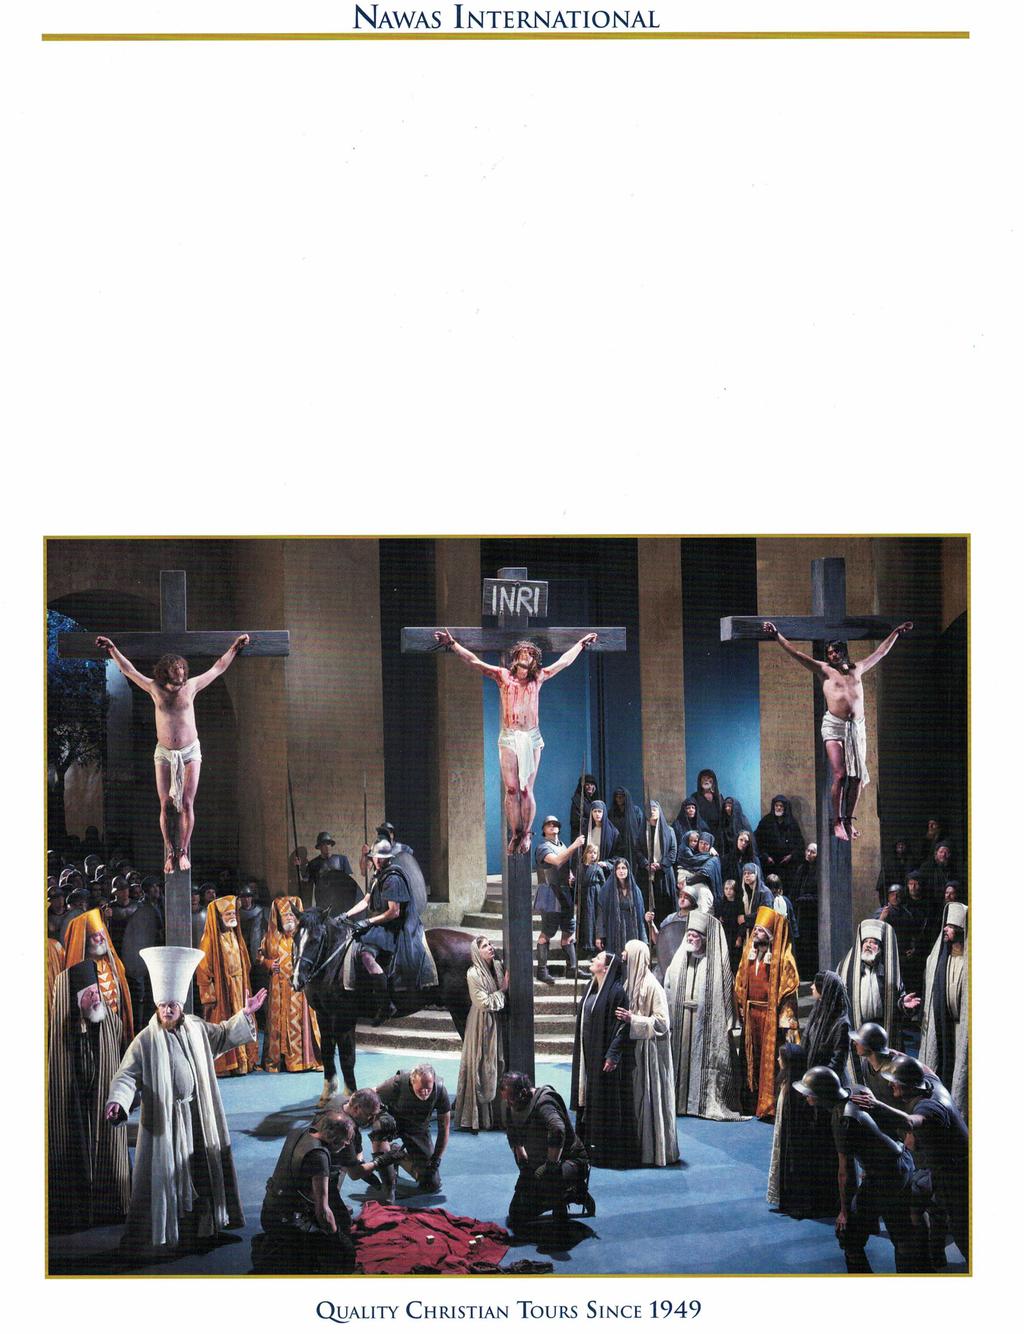 CLASSIC AUSTRIA & GERMANY PILGRIMAGE Featuring the Passion Play of Oberammergau 11 Days: June 30 - July 10, 2020 Visiting Heidelberg Rhine Valley Innsbruck